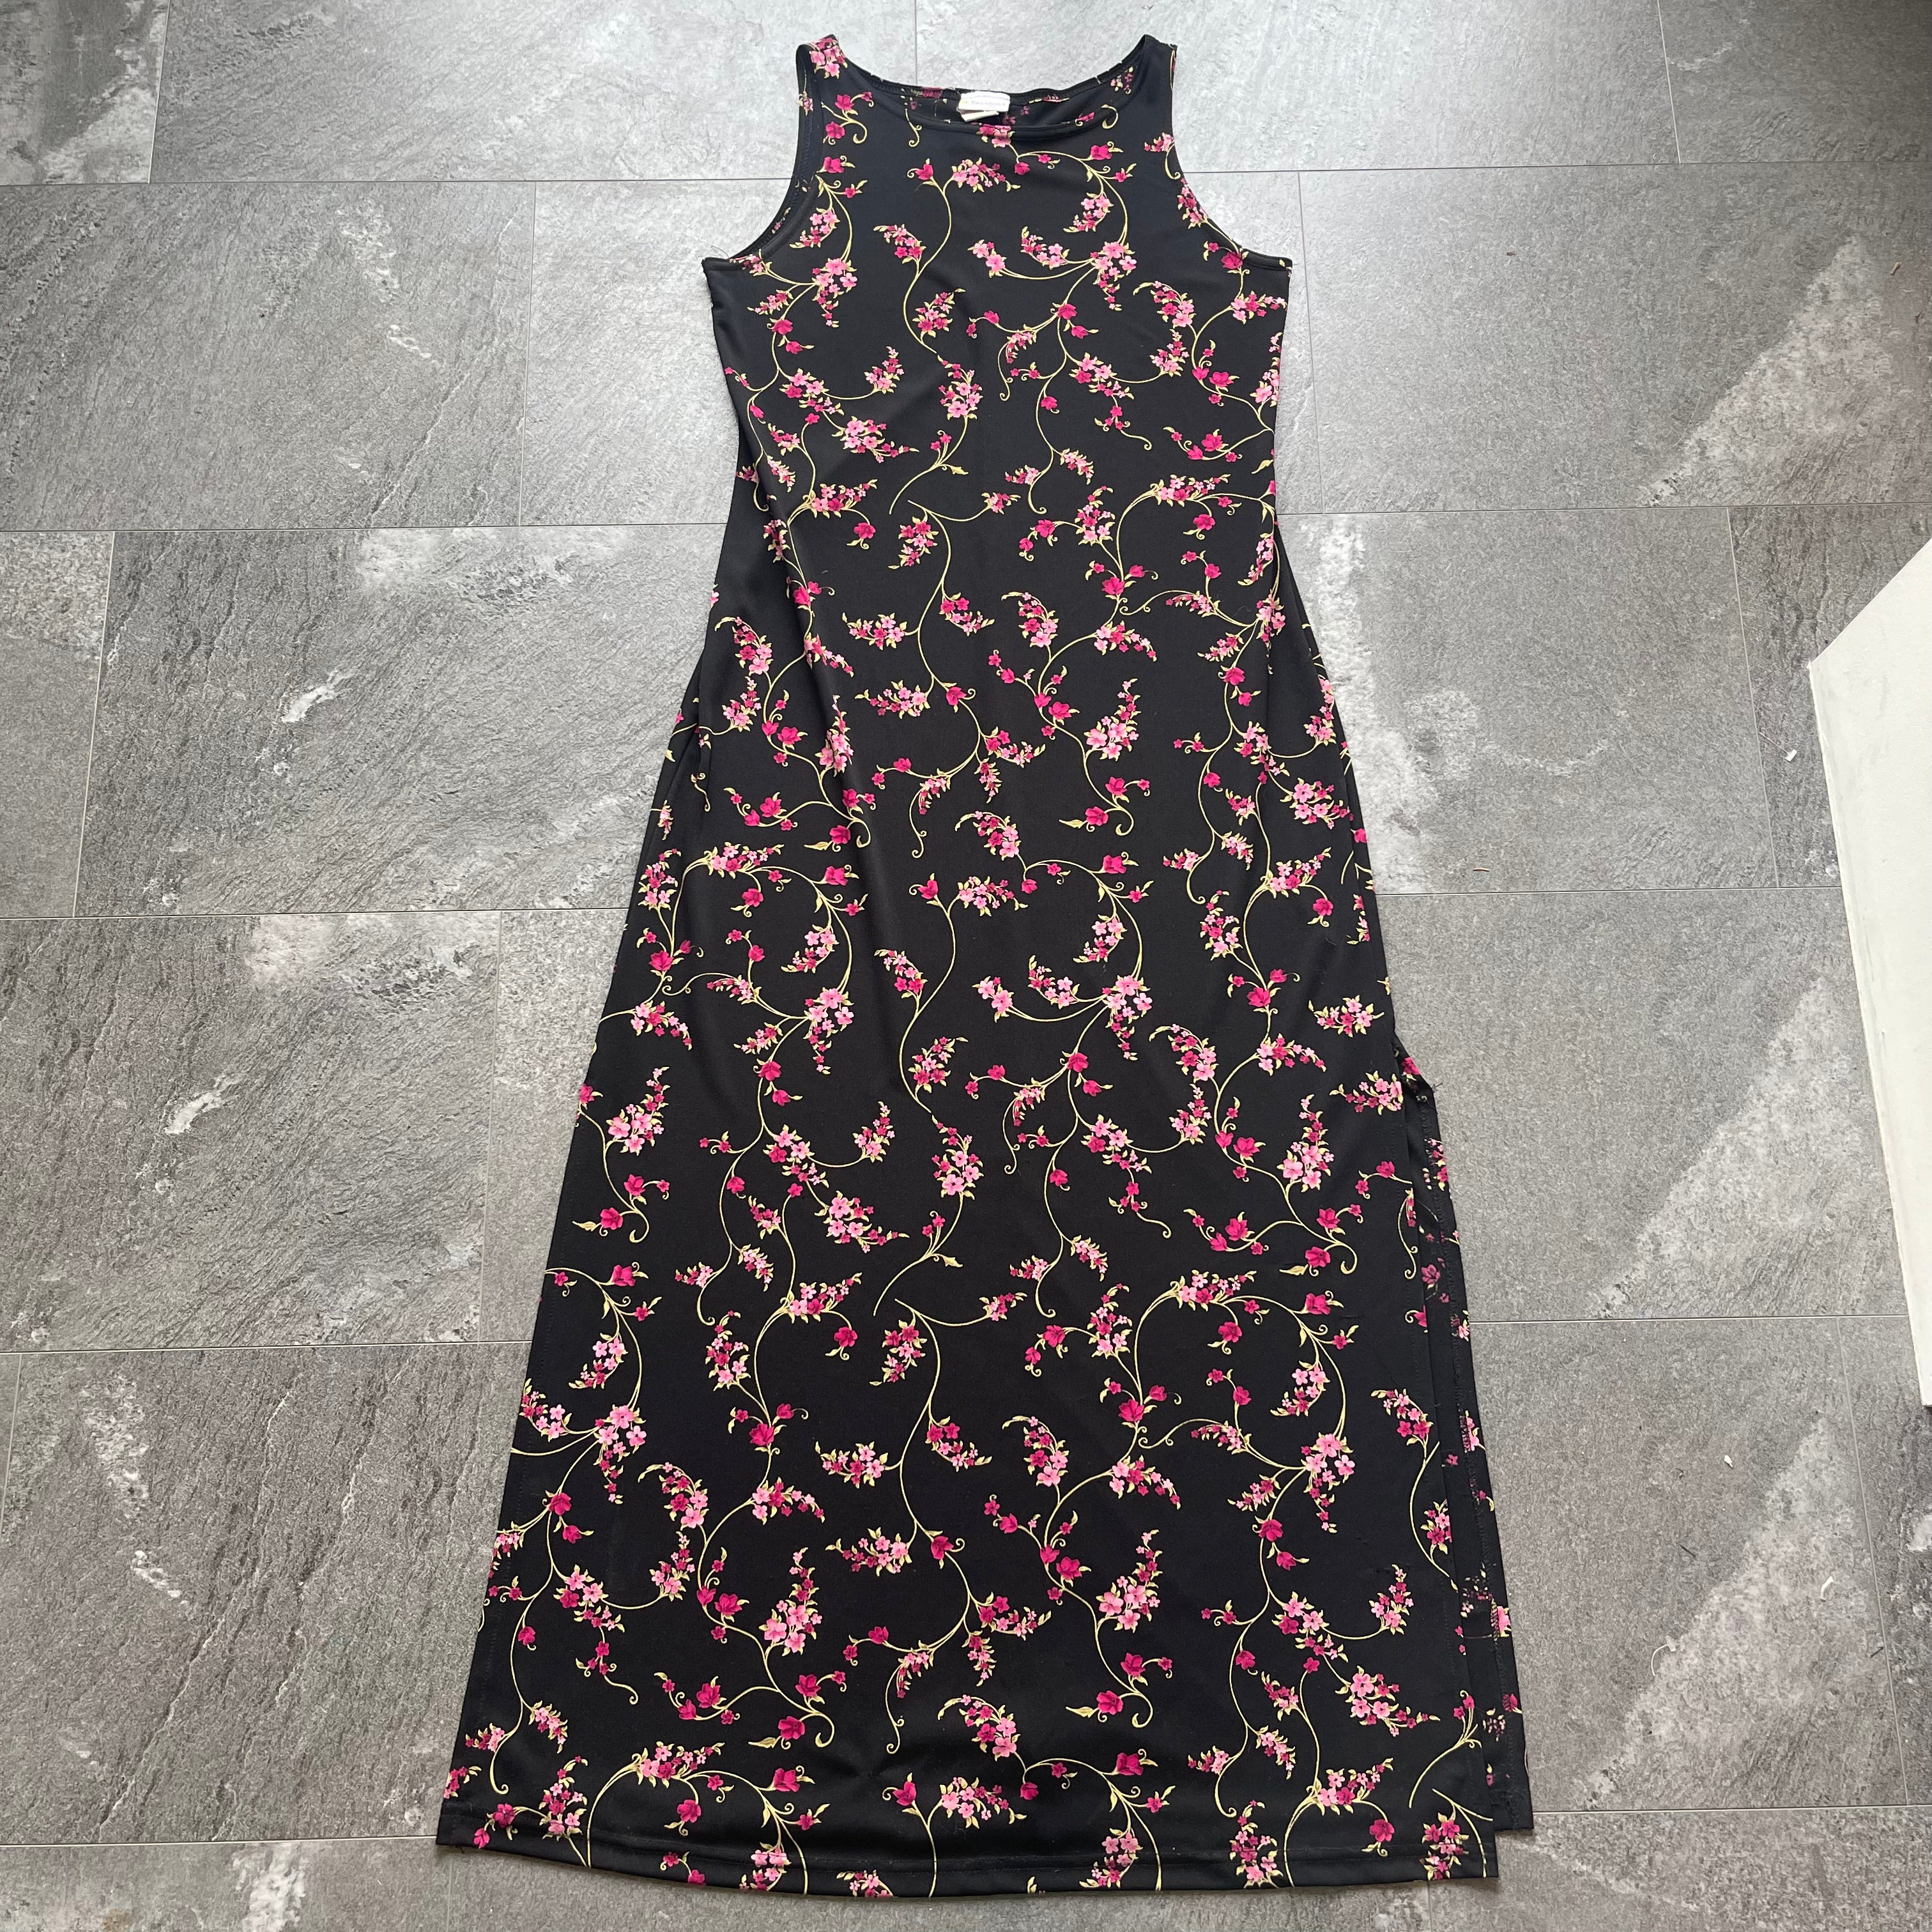 A Fortiori Foral Maxi Dress with Split